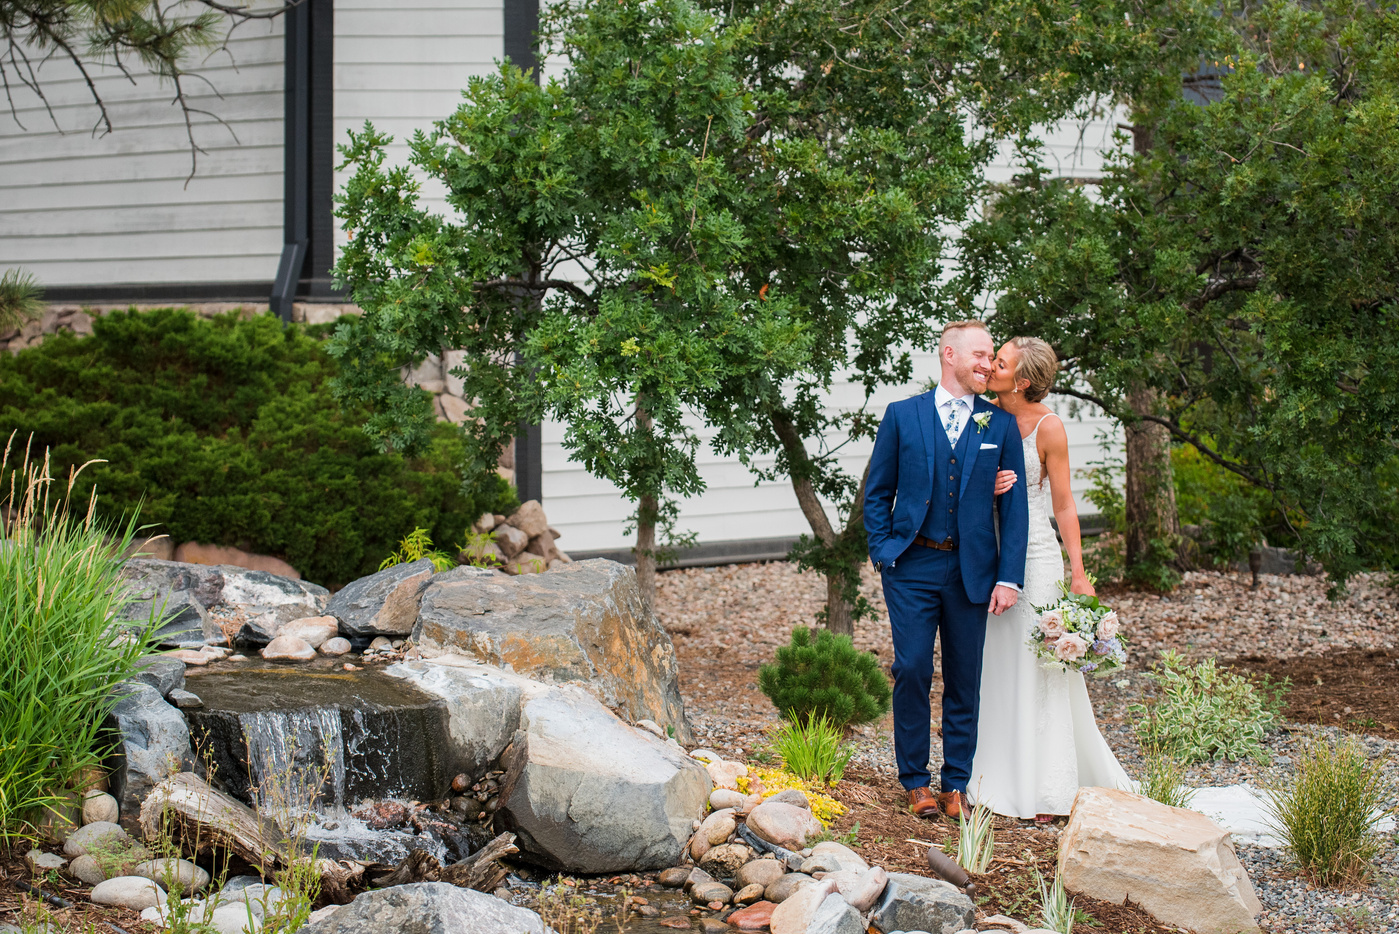 A bride and groom in front of a waterfall at their Denver wedding venue, The Oaks at Plum Creek.